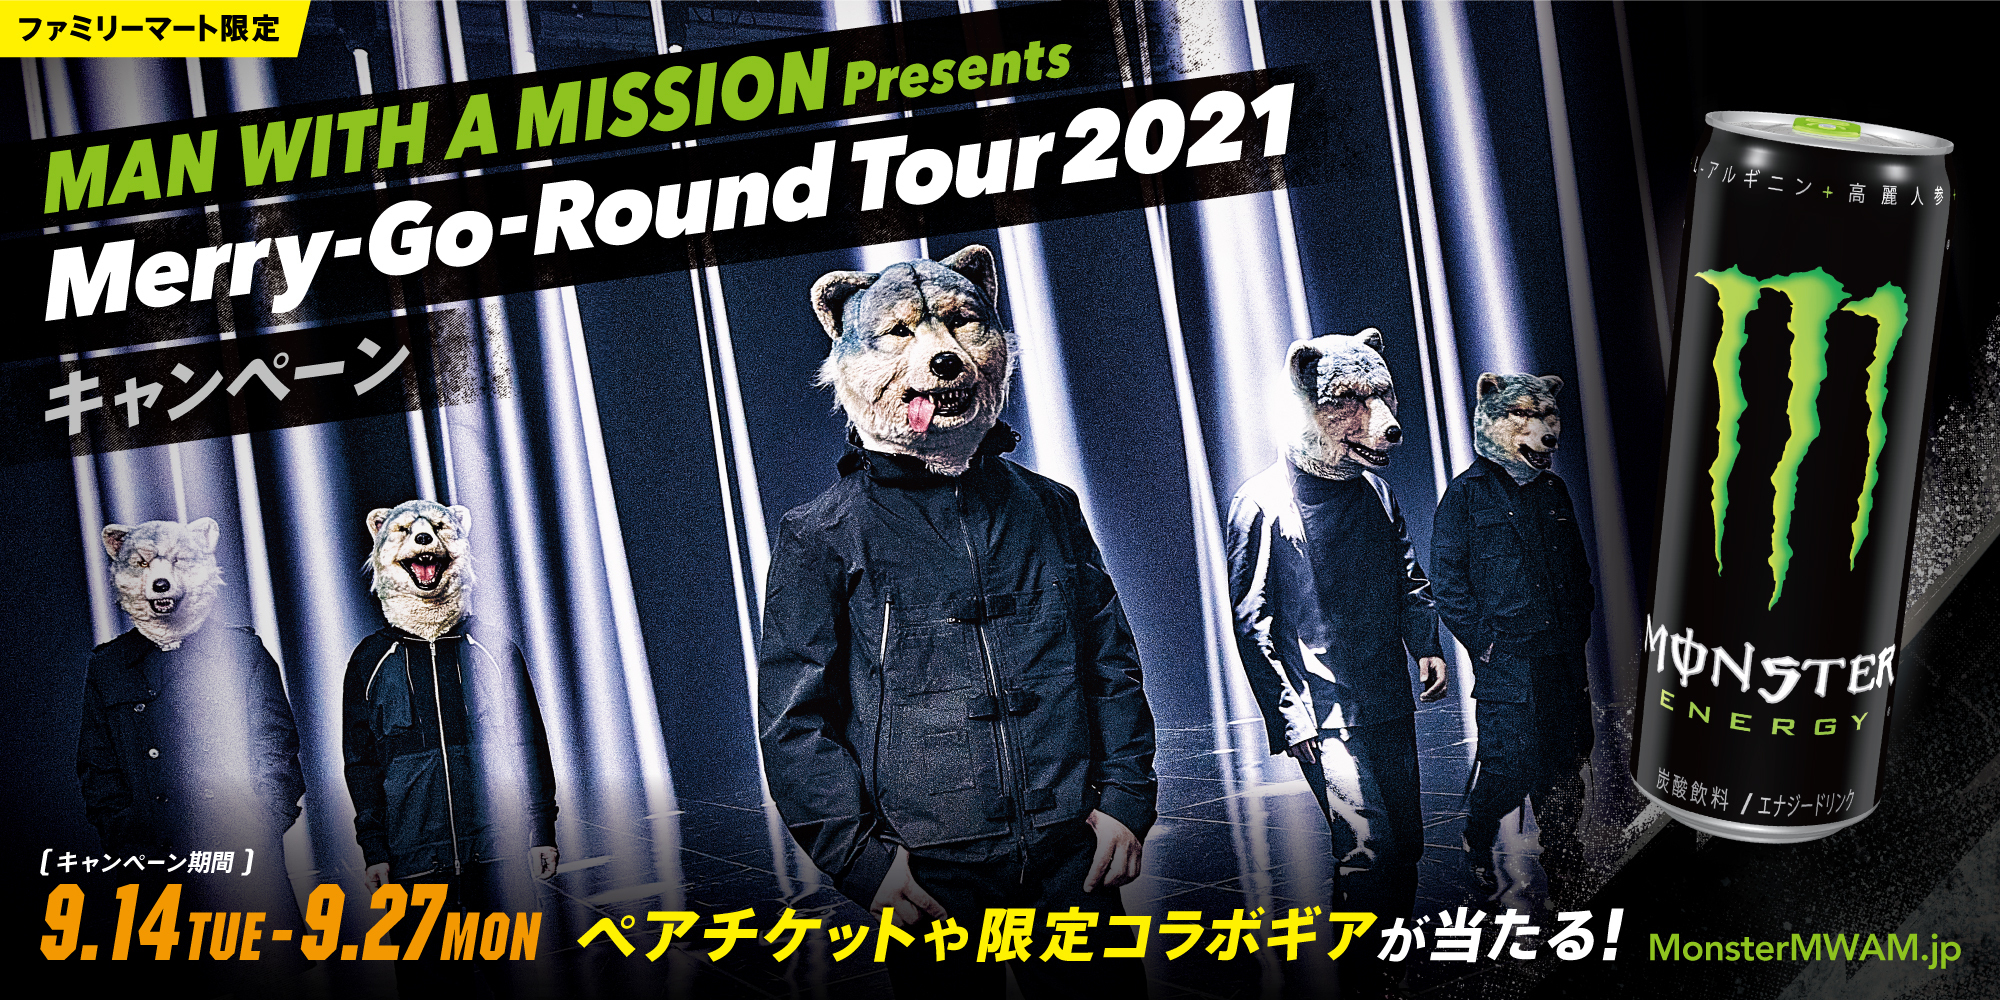 man with a mission monster 冷蔵庫ご確認お願い致します - その他